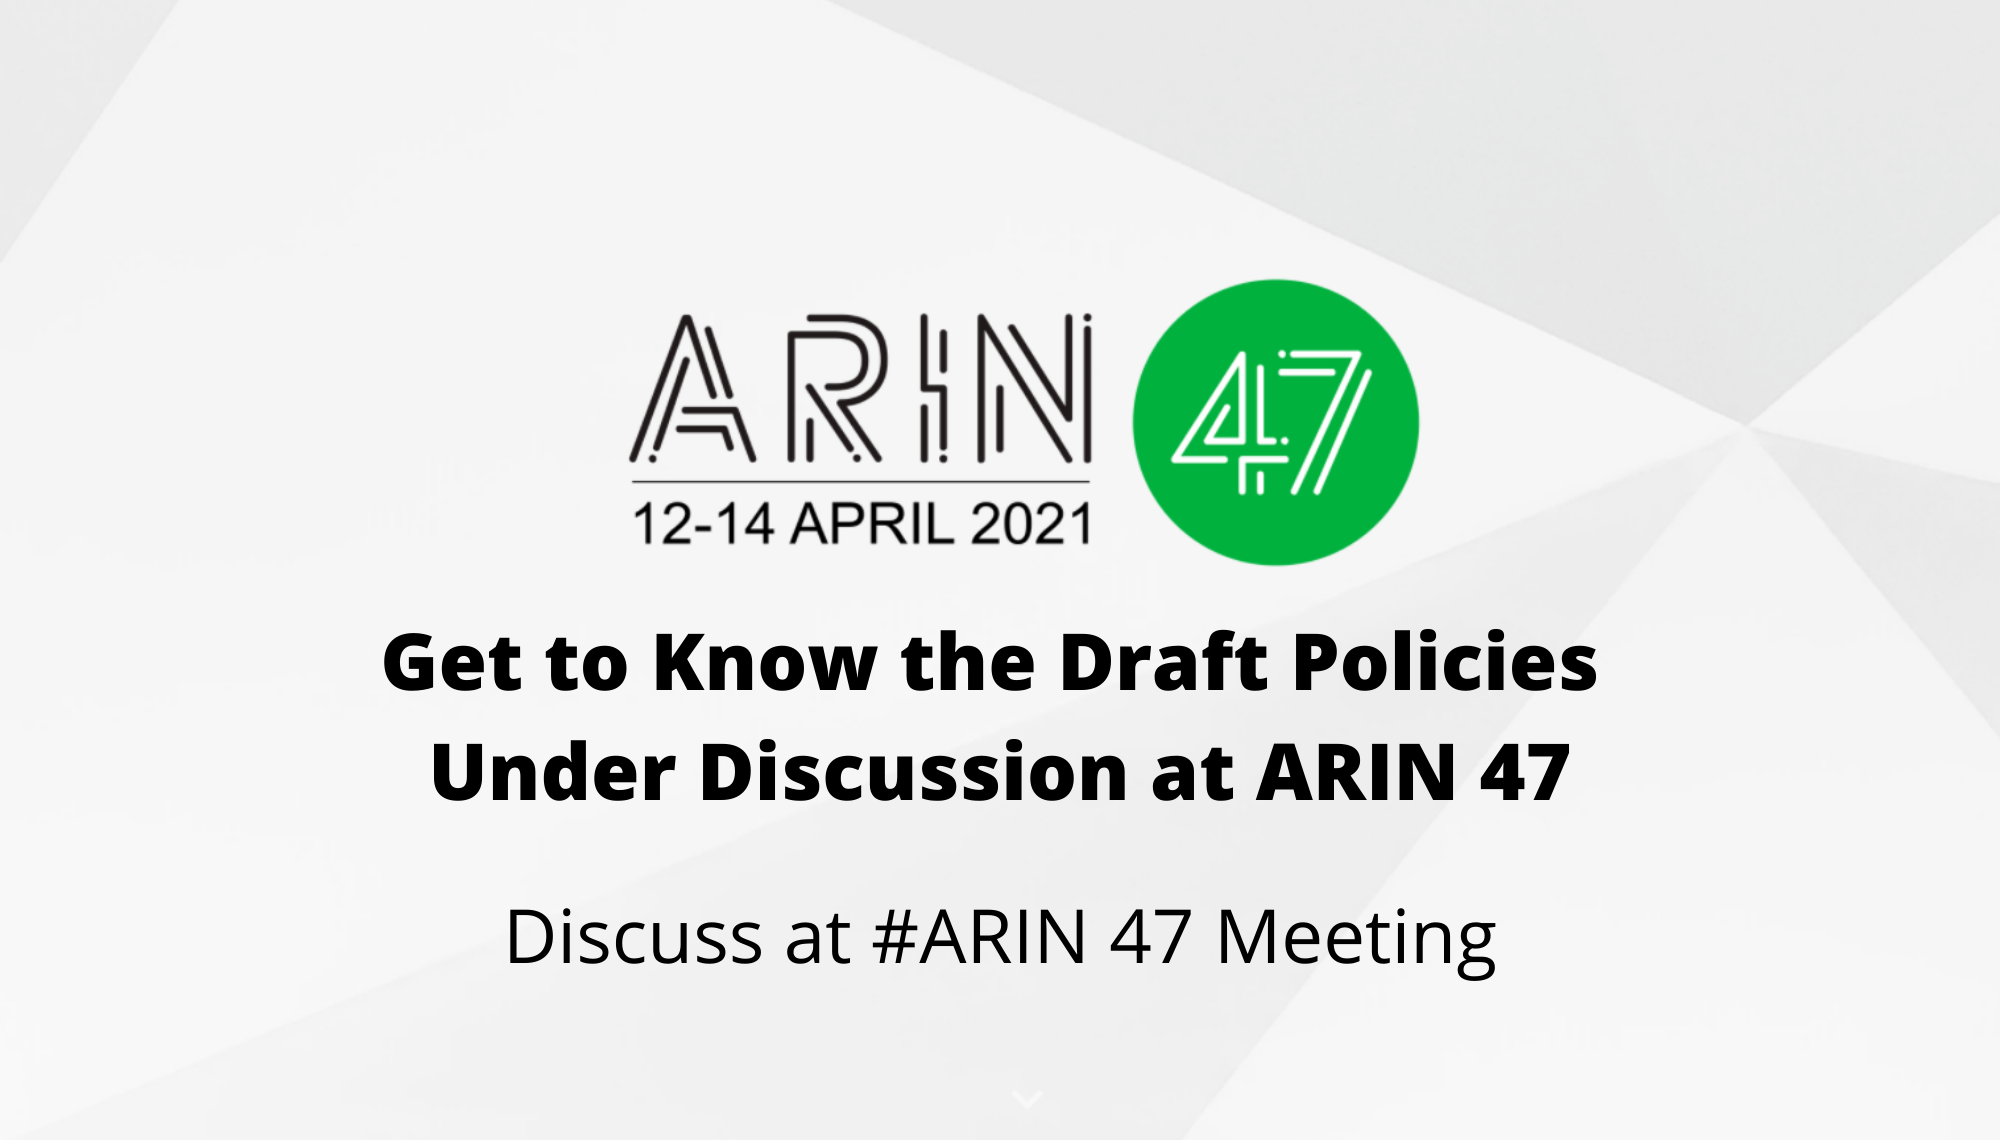 Get to Know the Draft Policies Under Discussion at ARIN 47